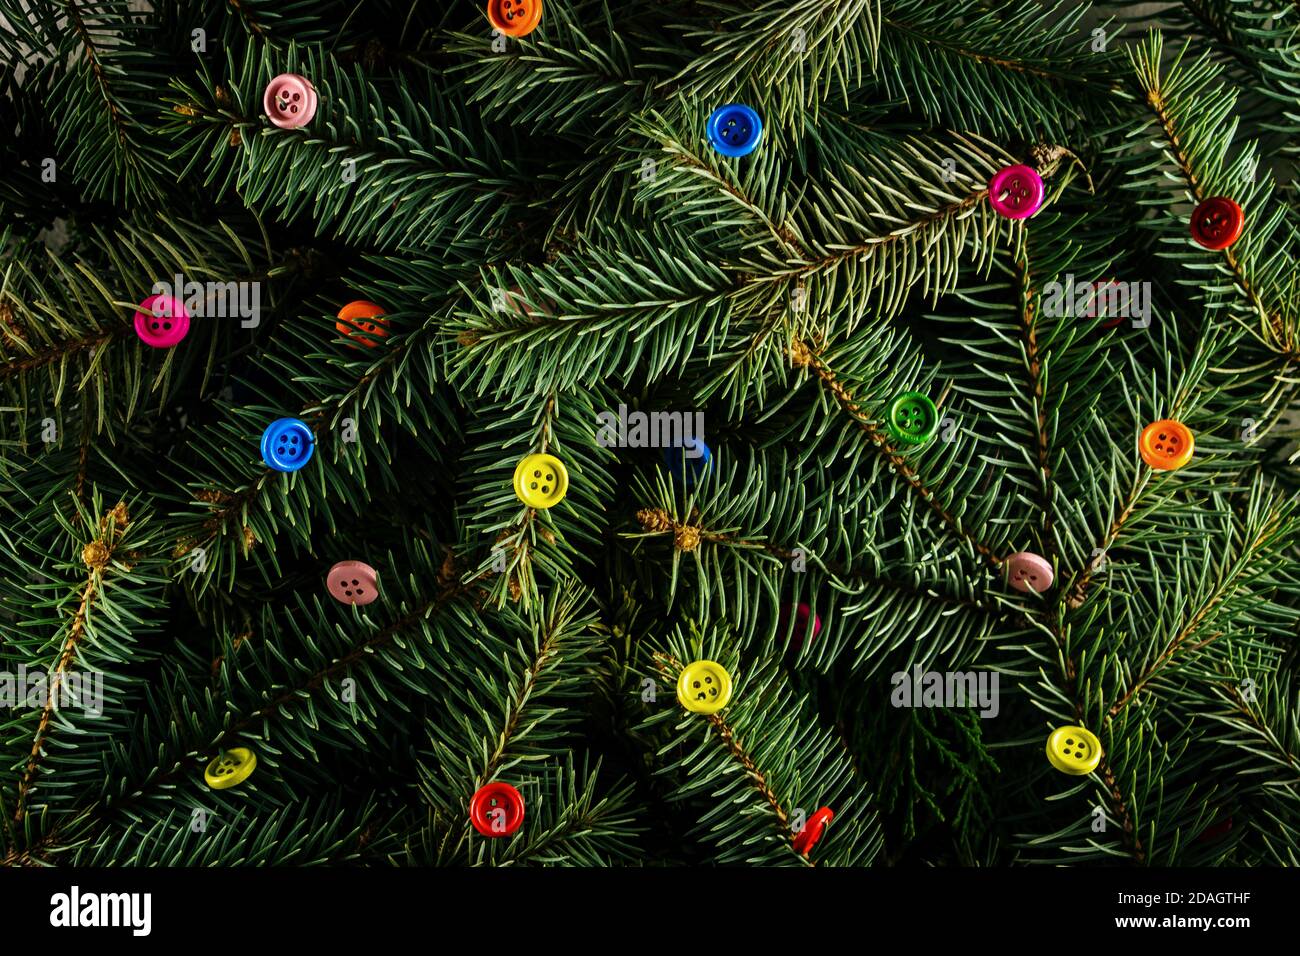 Layout made of Christmas tree branches with colorful buttons. Nature New Year concept. Stock Photo